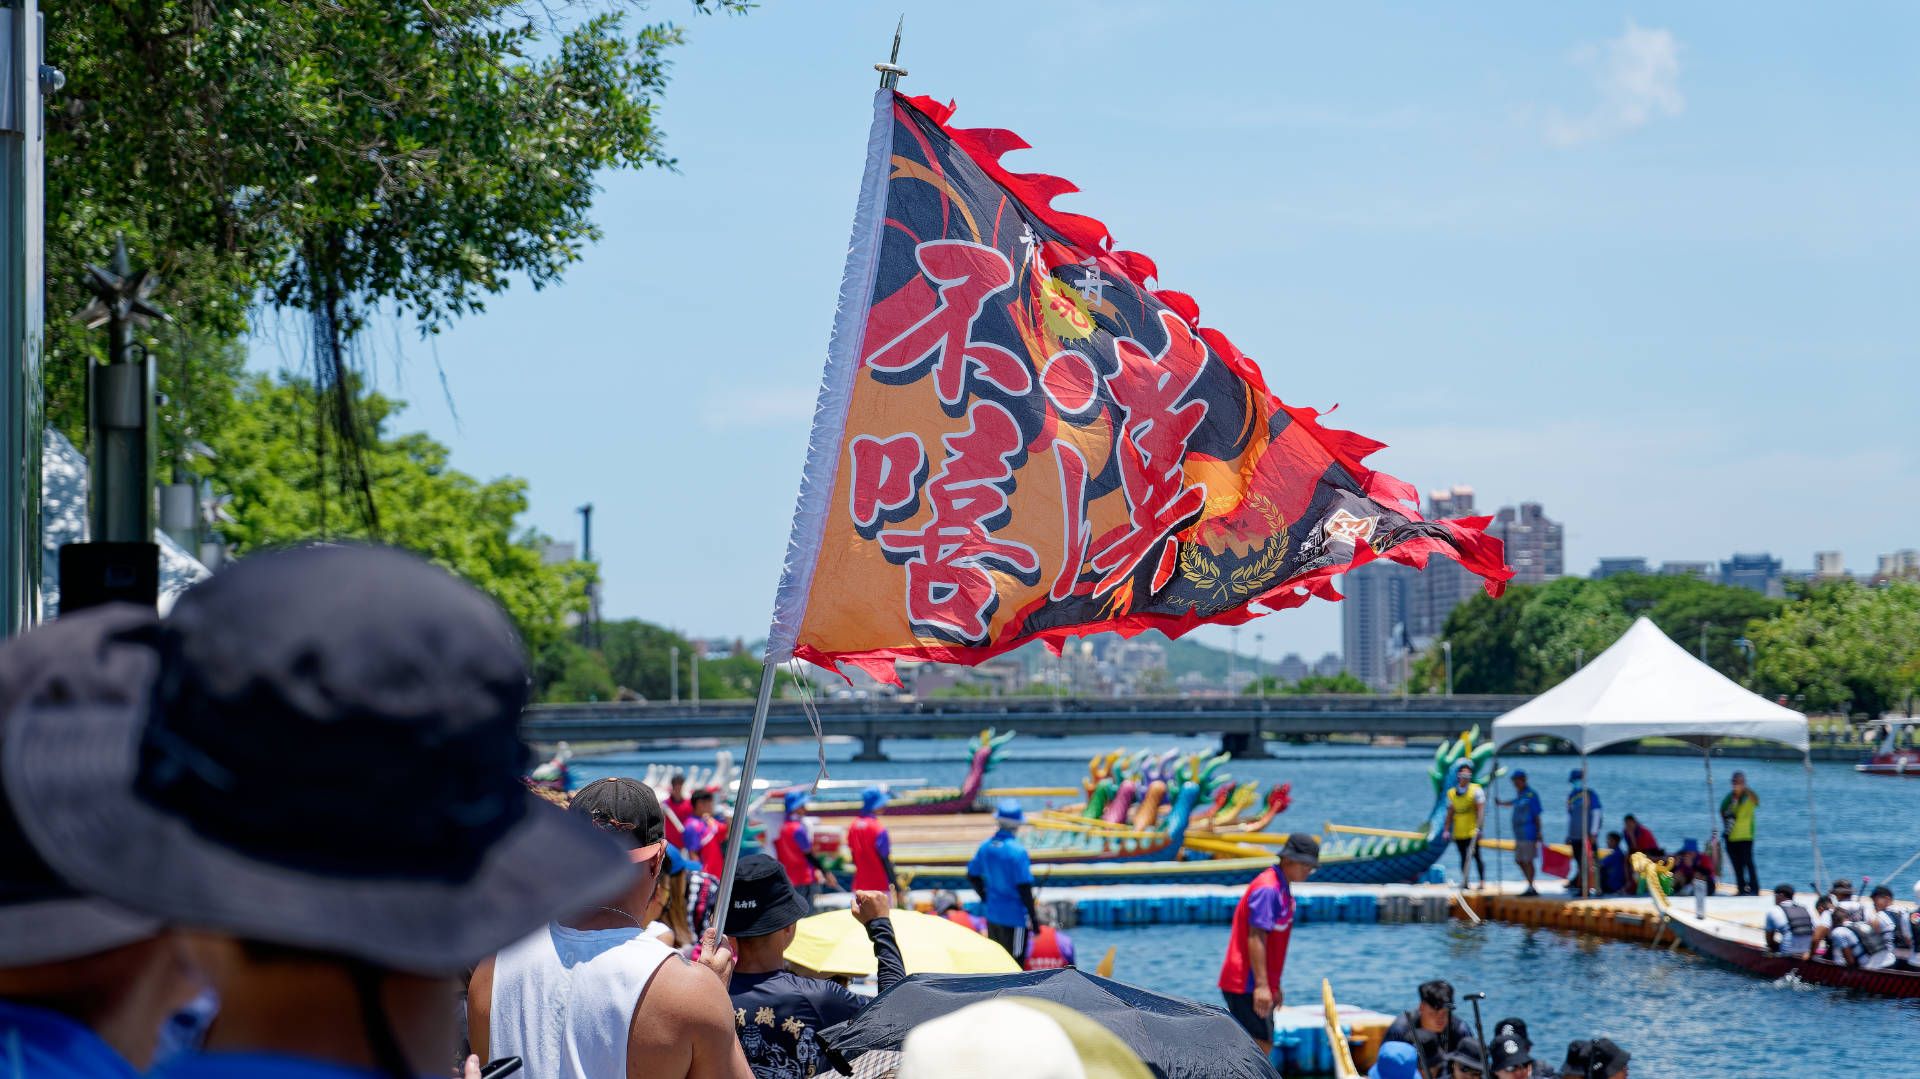 Amongst a crowd of spectators at the dragon boat tug-of-war competition, a man holds a flagpole with a large triangular flag comprising different patterns and Chinese characters.